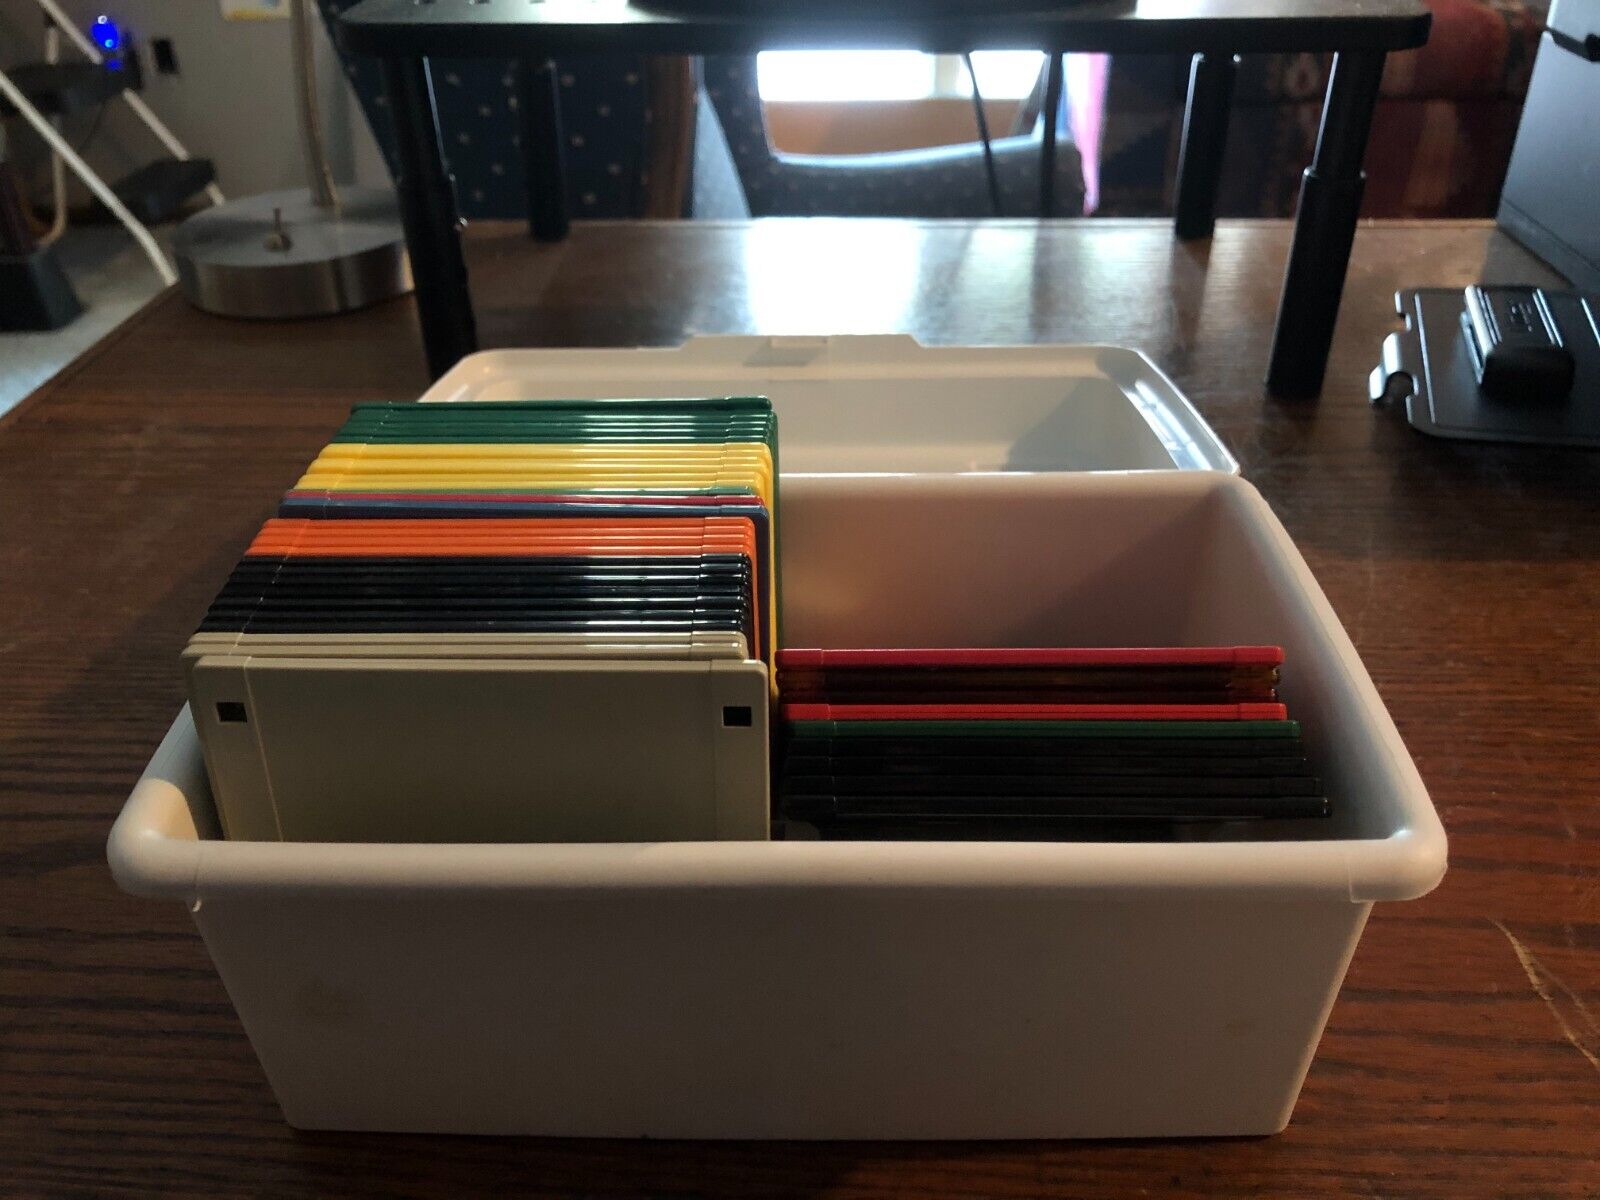 Collection of Old Floppy Disks